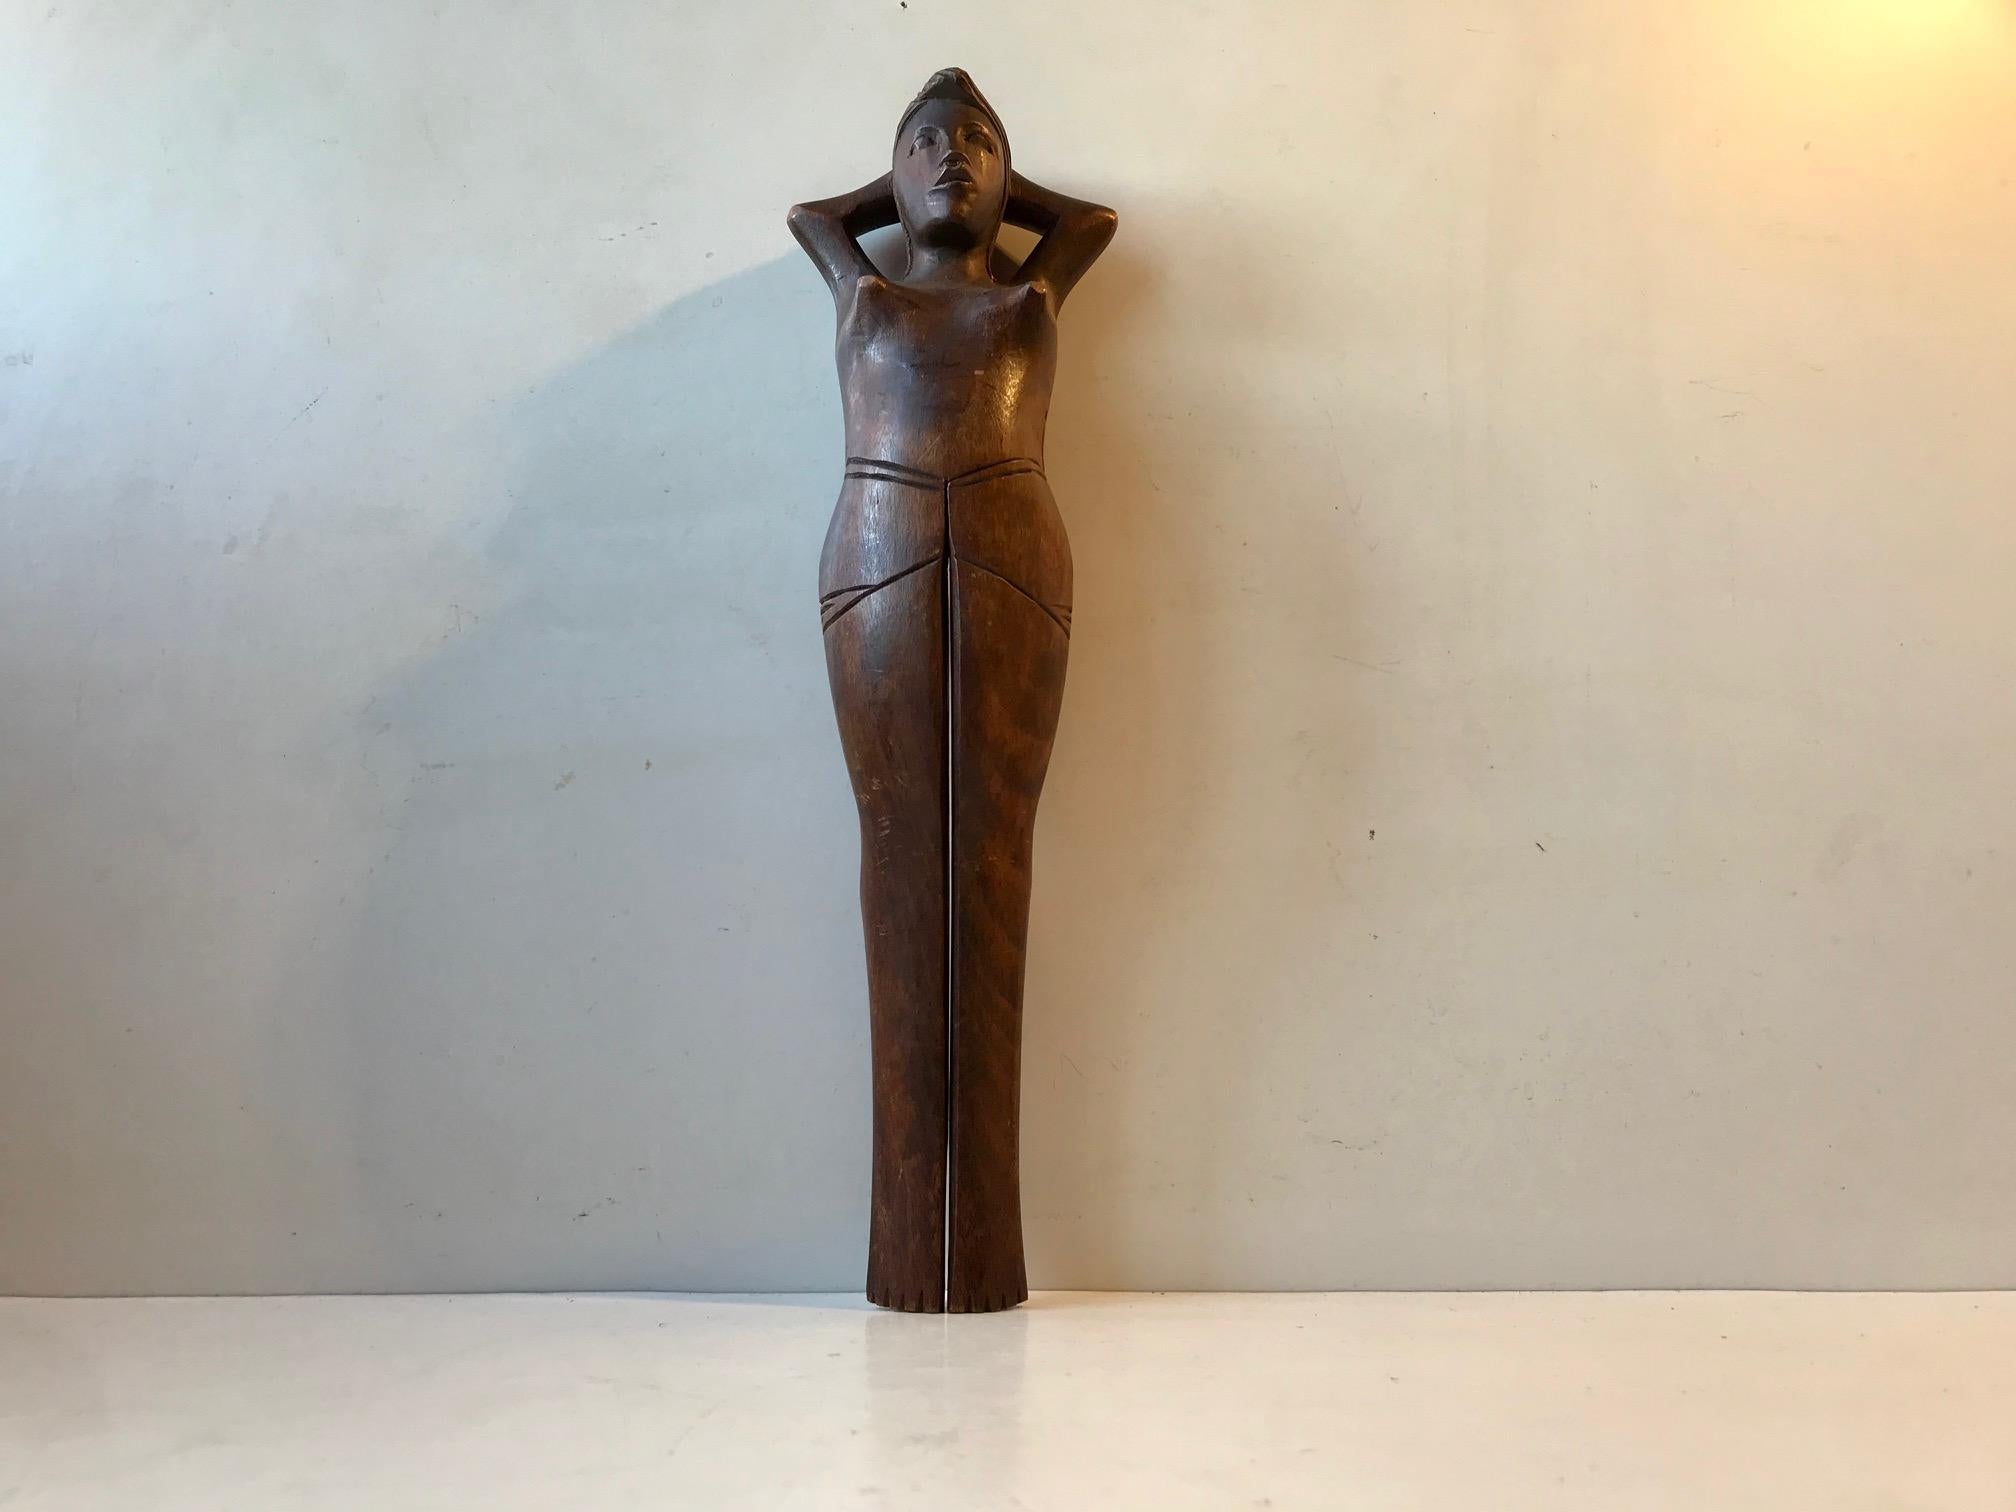 Large figural nutcracker in the shape of a young naked women. It’s made from hand carved oak and assembled without the use of metal. She has got some legs. The legs measures up 21 cm up the total length of 34 cm. It’s a Treen related Folk Art piece